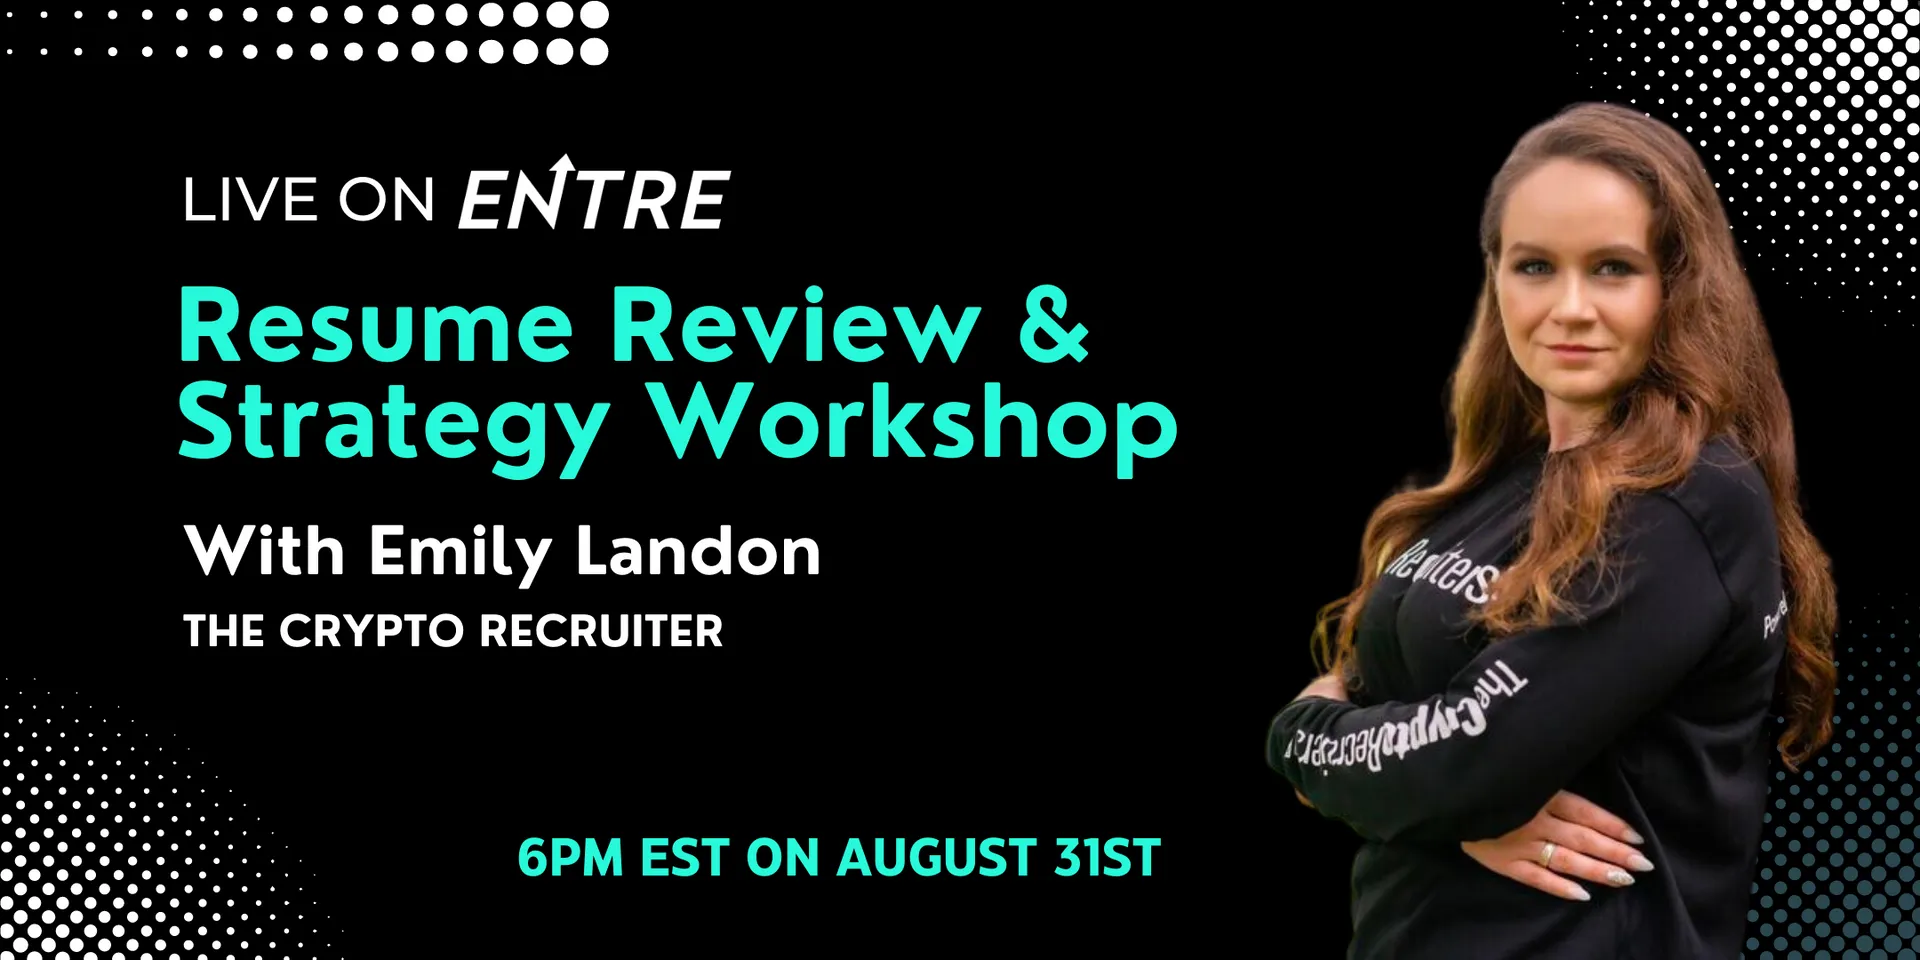 🚨 JOB SEEKERS 🚨

We've teamed up with <@BtGsgGdXRaMGIrsSJETQONmspgR2> to put together an event to help you land your dream job 🚀

Join the Resume Review & Strategy Workshop 💼

August 31st at 6pm EST 🗓️

RSVP here 👉 https://joinentre.com/event/a6a61888-f408-4968-ad7a-78237c8d206f